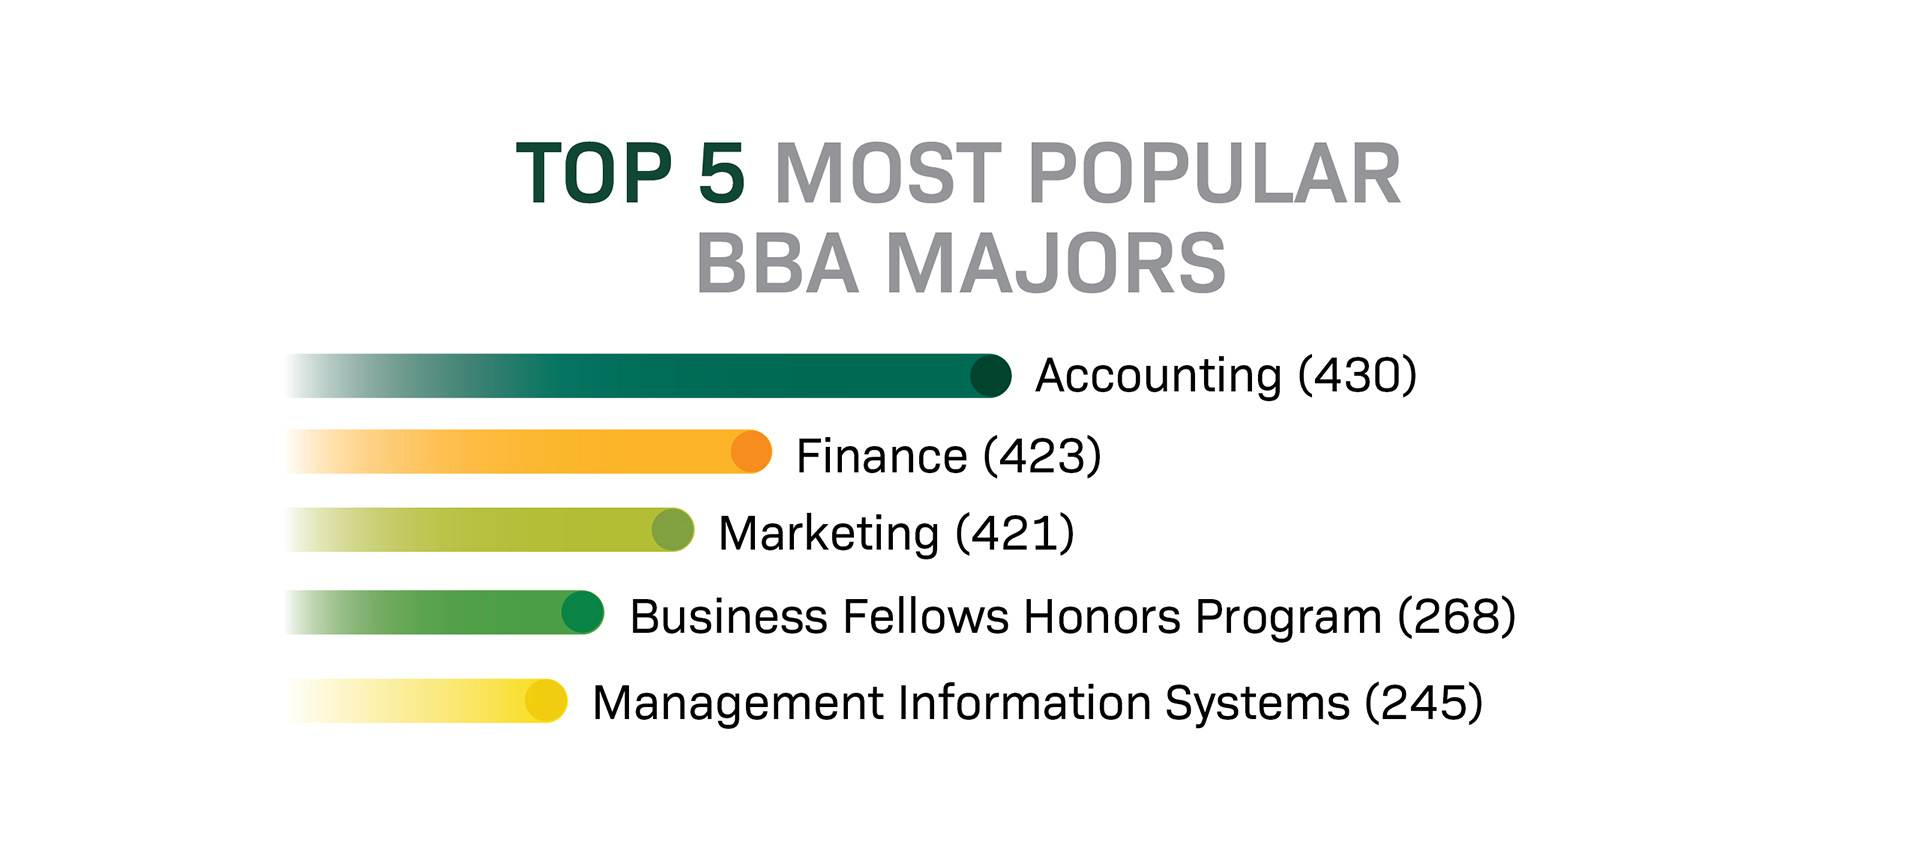 Top 5 most popular BBA Majors are accounting (447), finance (370), marketing (309), business fellows (267) and MIS (243)